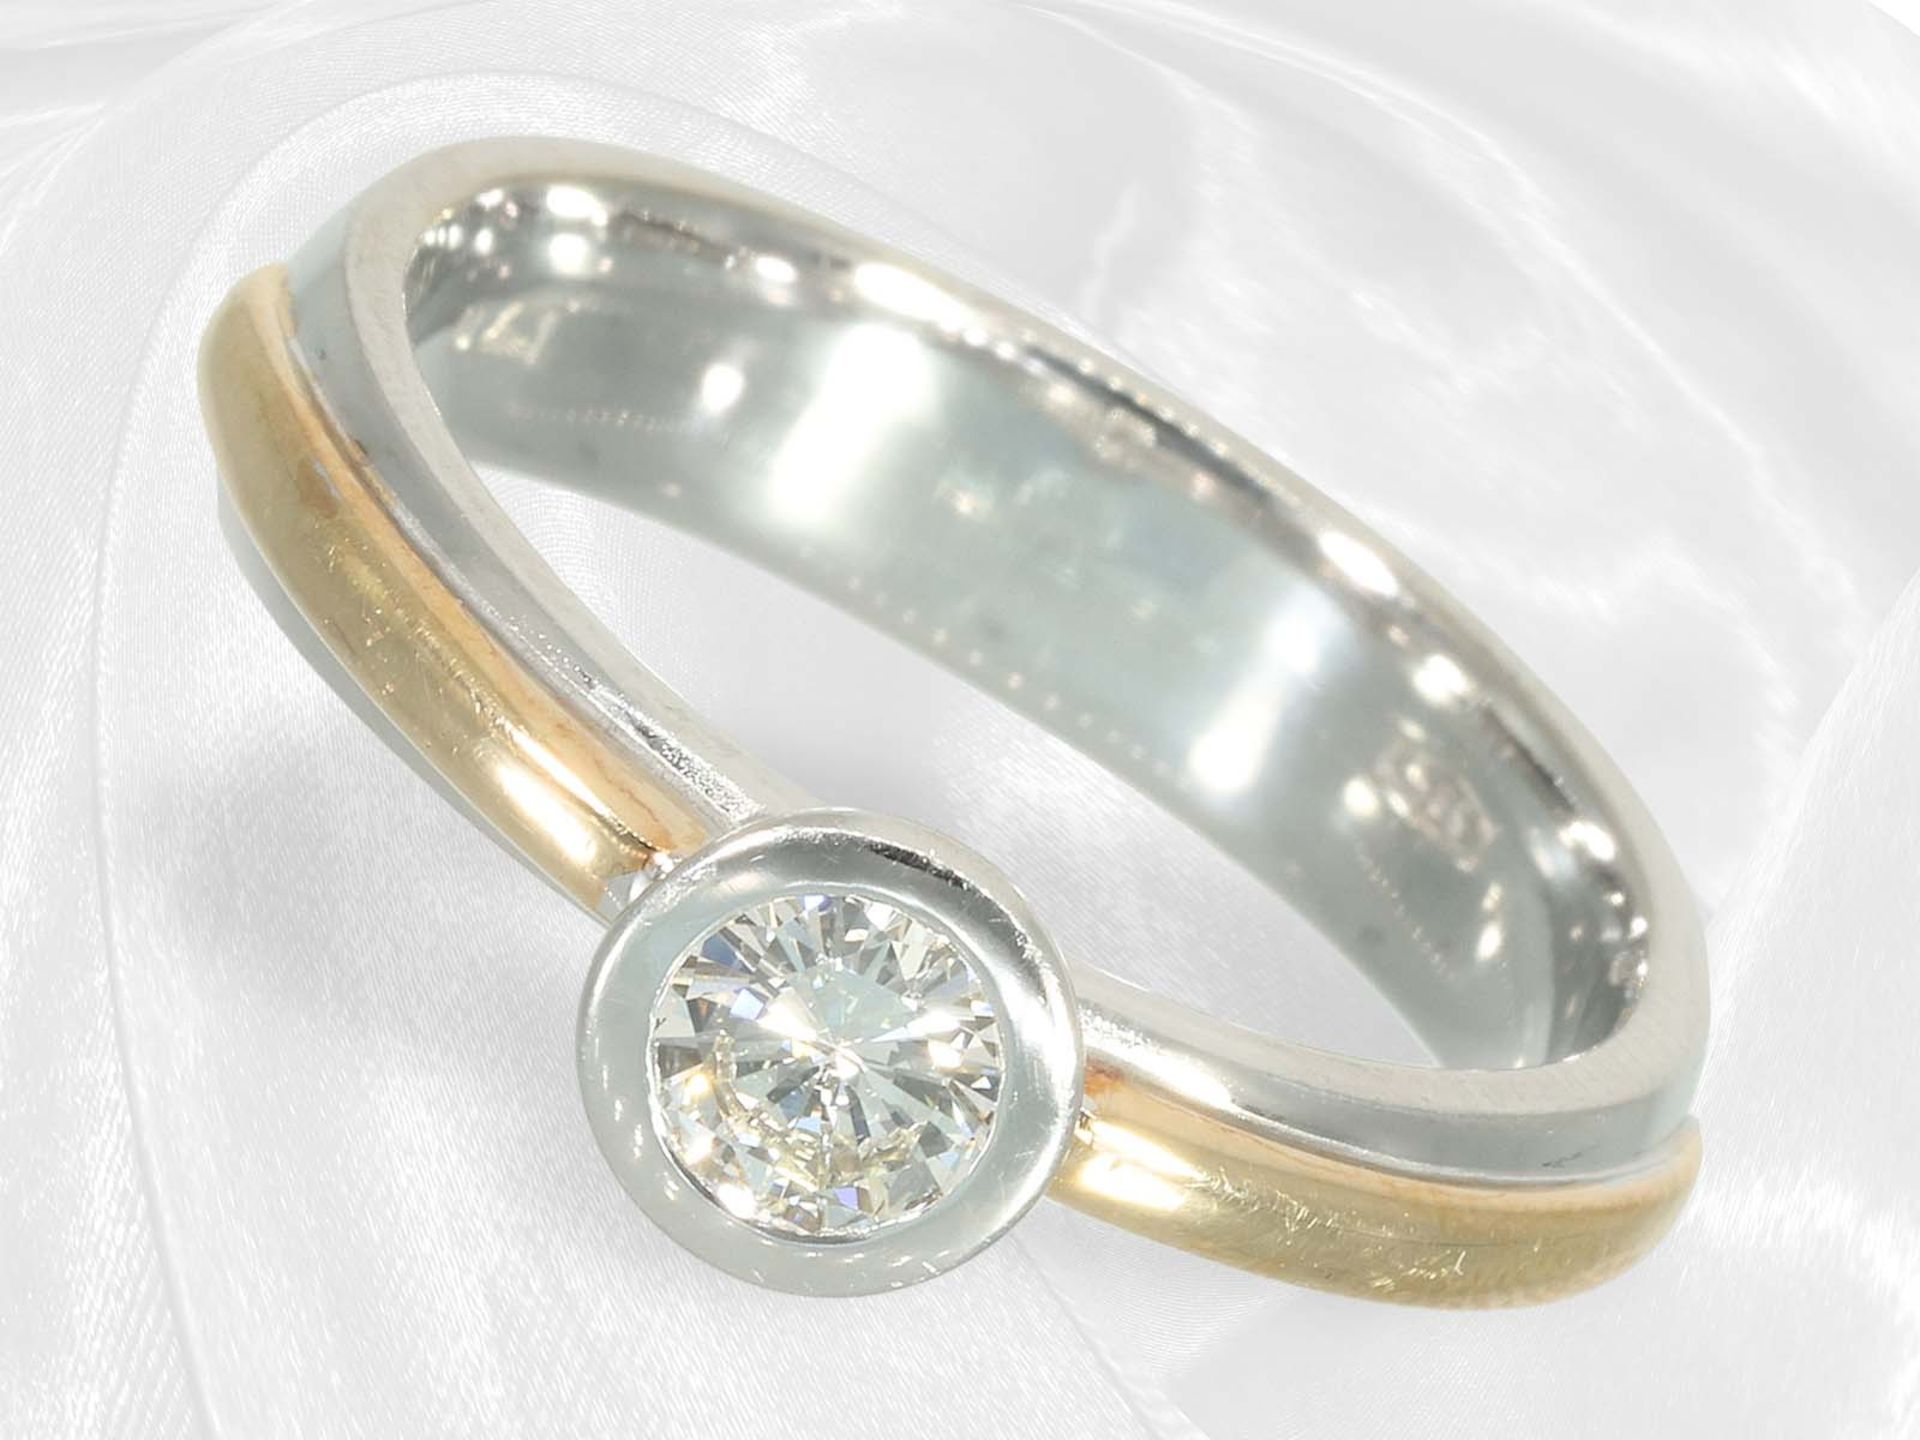 Modern and high quality bicolour goldsmith ring with a brilliant-cut diamond of approx. 0.41ct